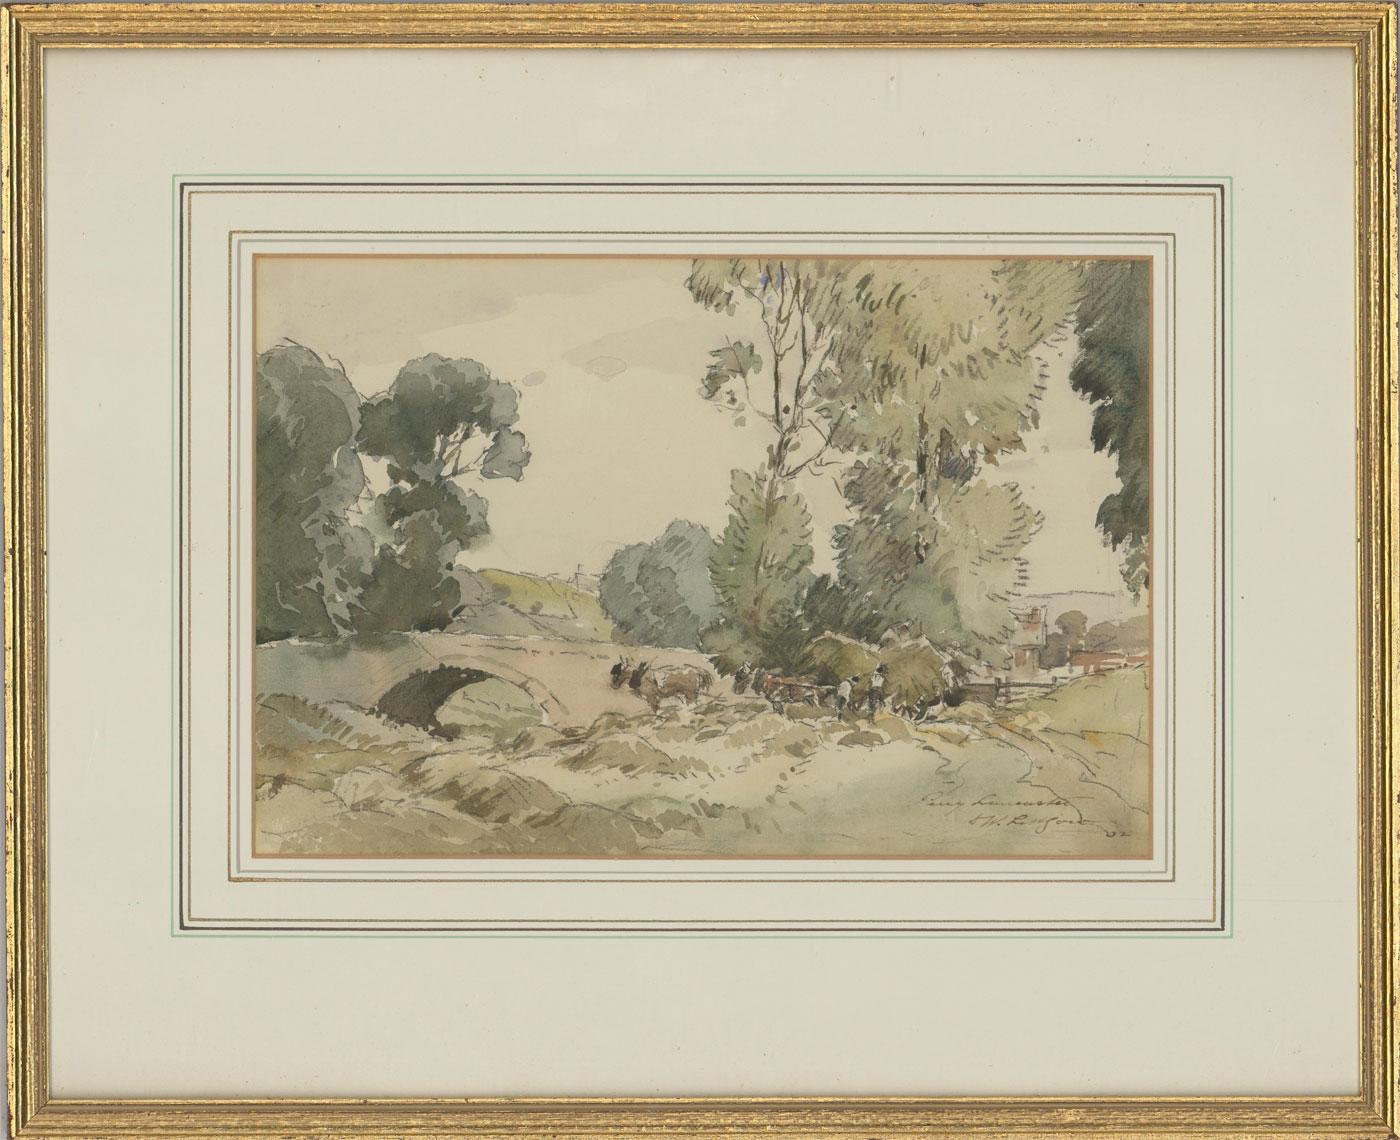 A fine example of a delicate landscape work in watercolour with charcoal detailing, by the listed British artist Percy Lancaster (1878-1951) RBA RI RIBA. This composition is typical of the artists style, depicting a rural landscape with livestock